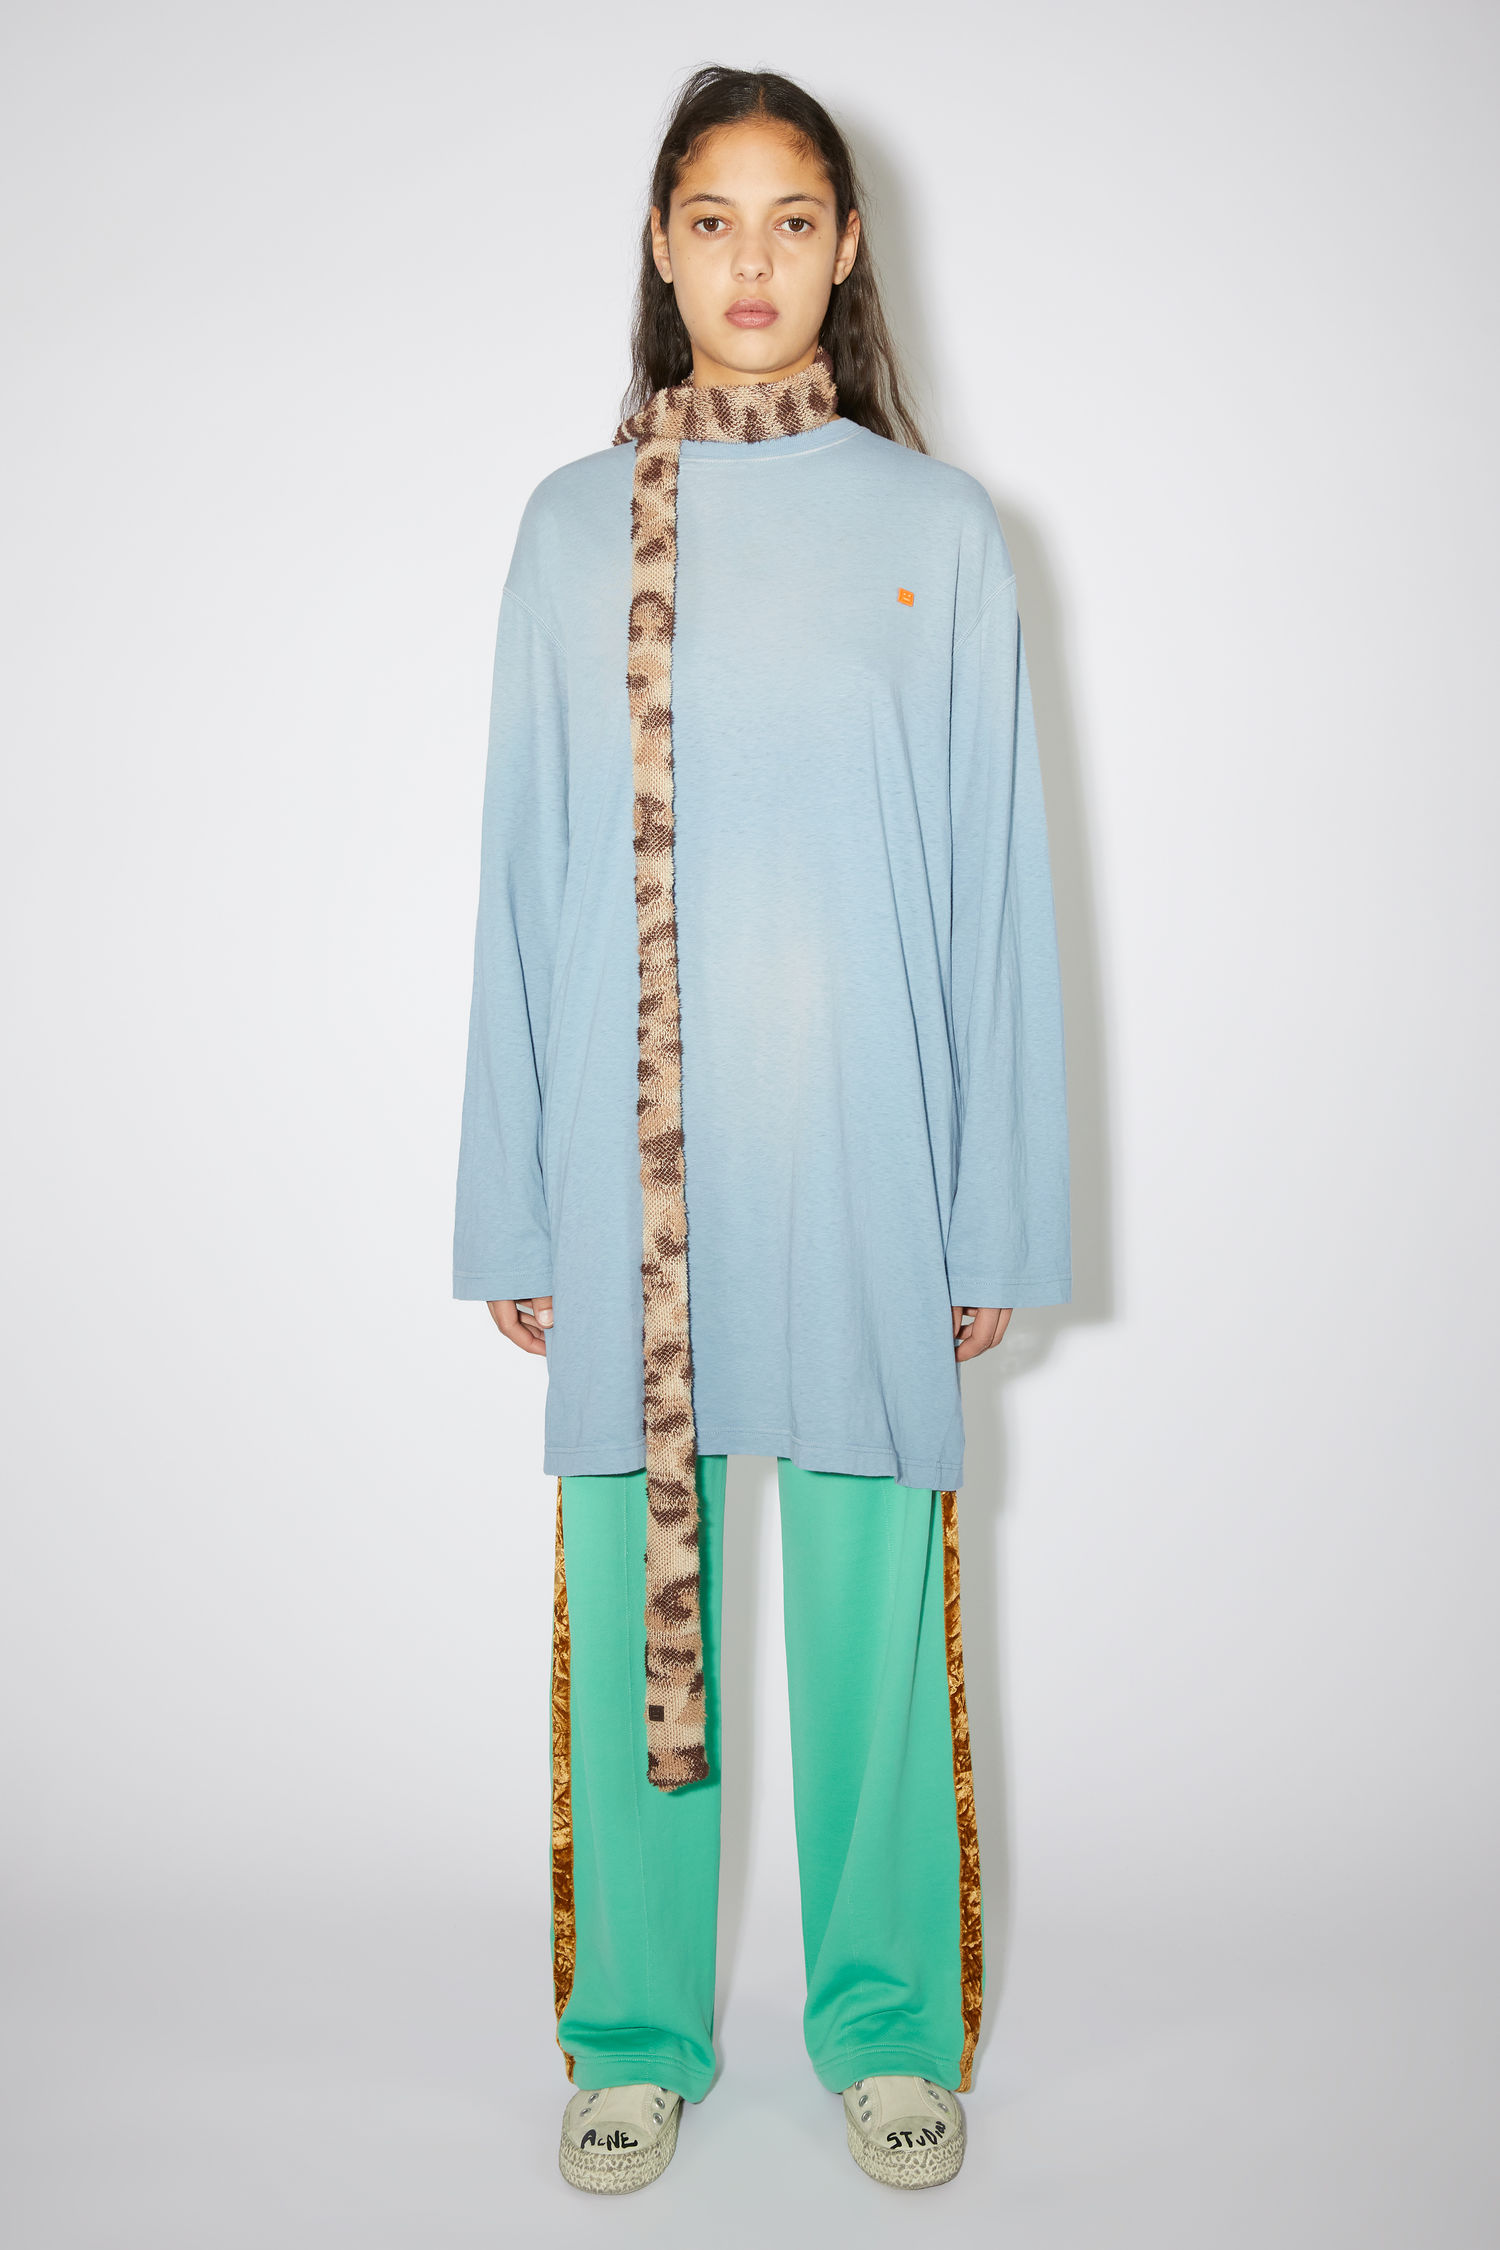 Acne Studios Face collection - Shop women’s clothing and accessories